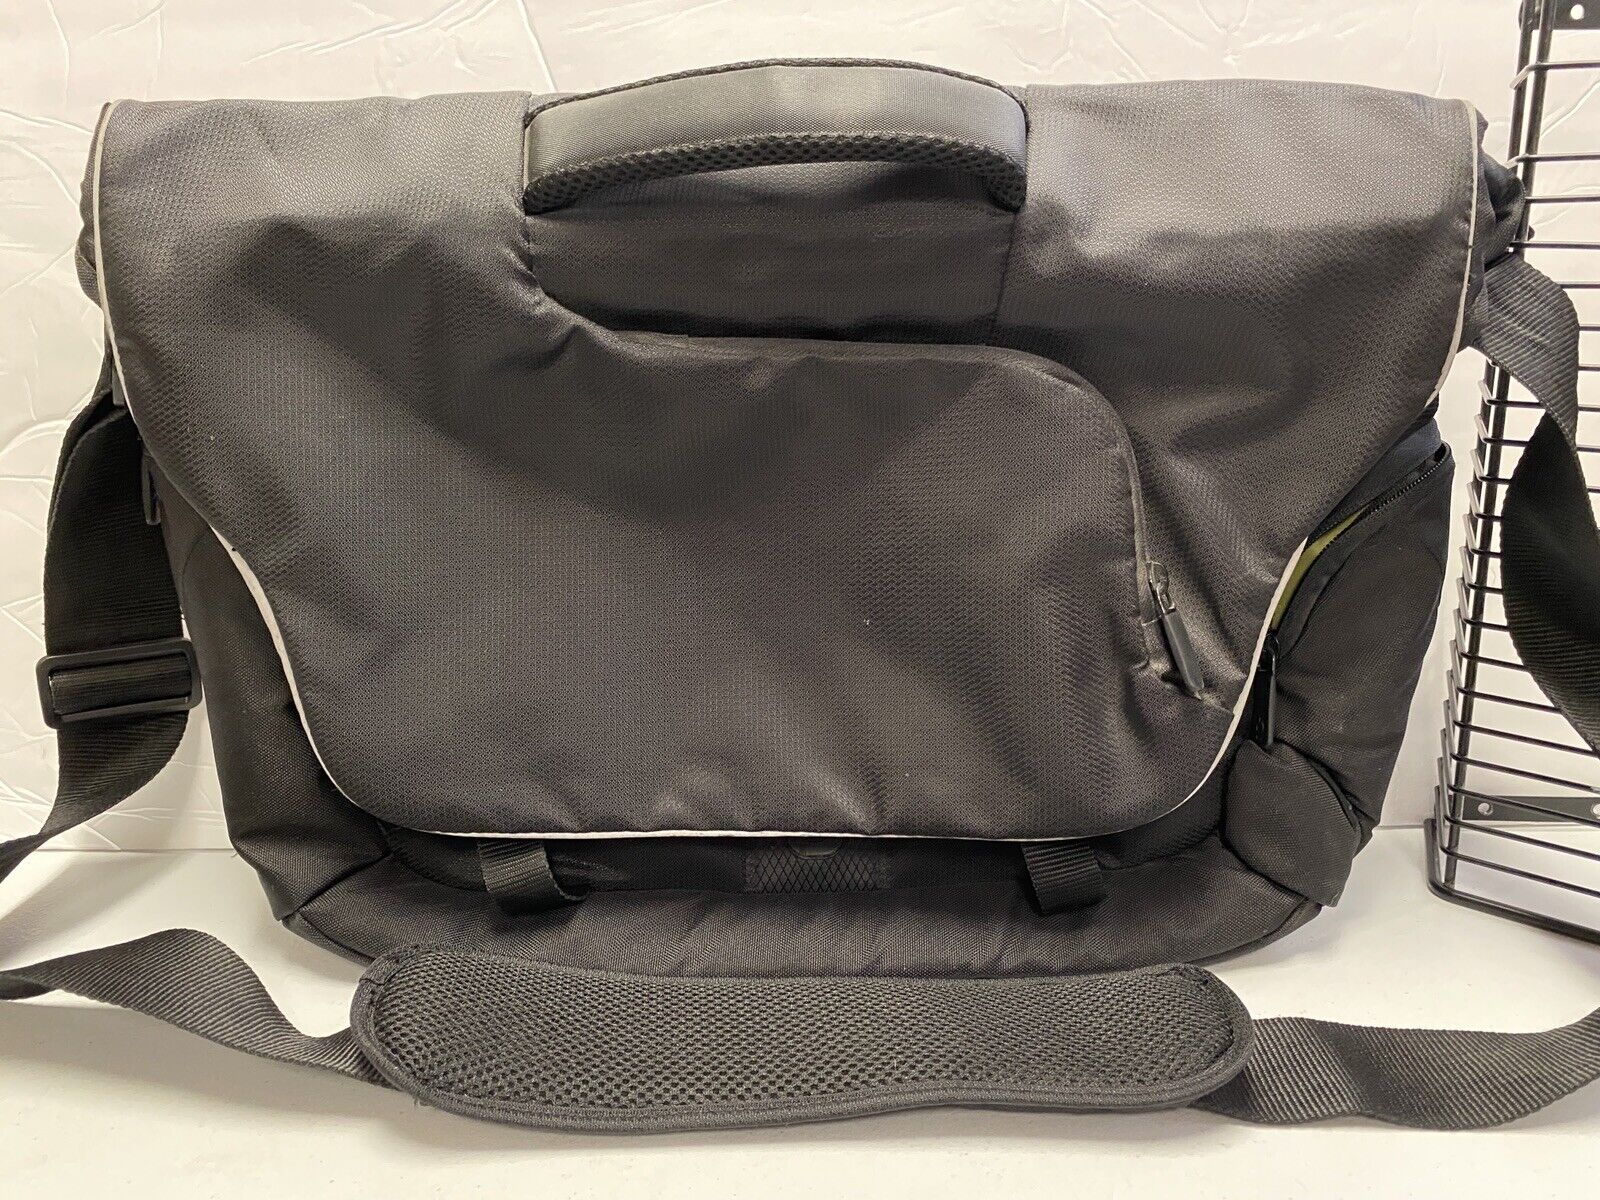 Powerbag messenger bag with charging stations